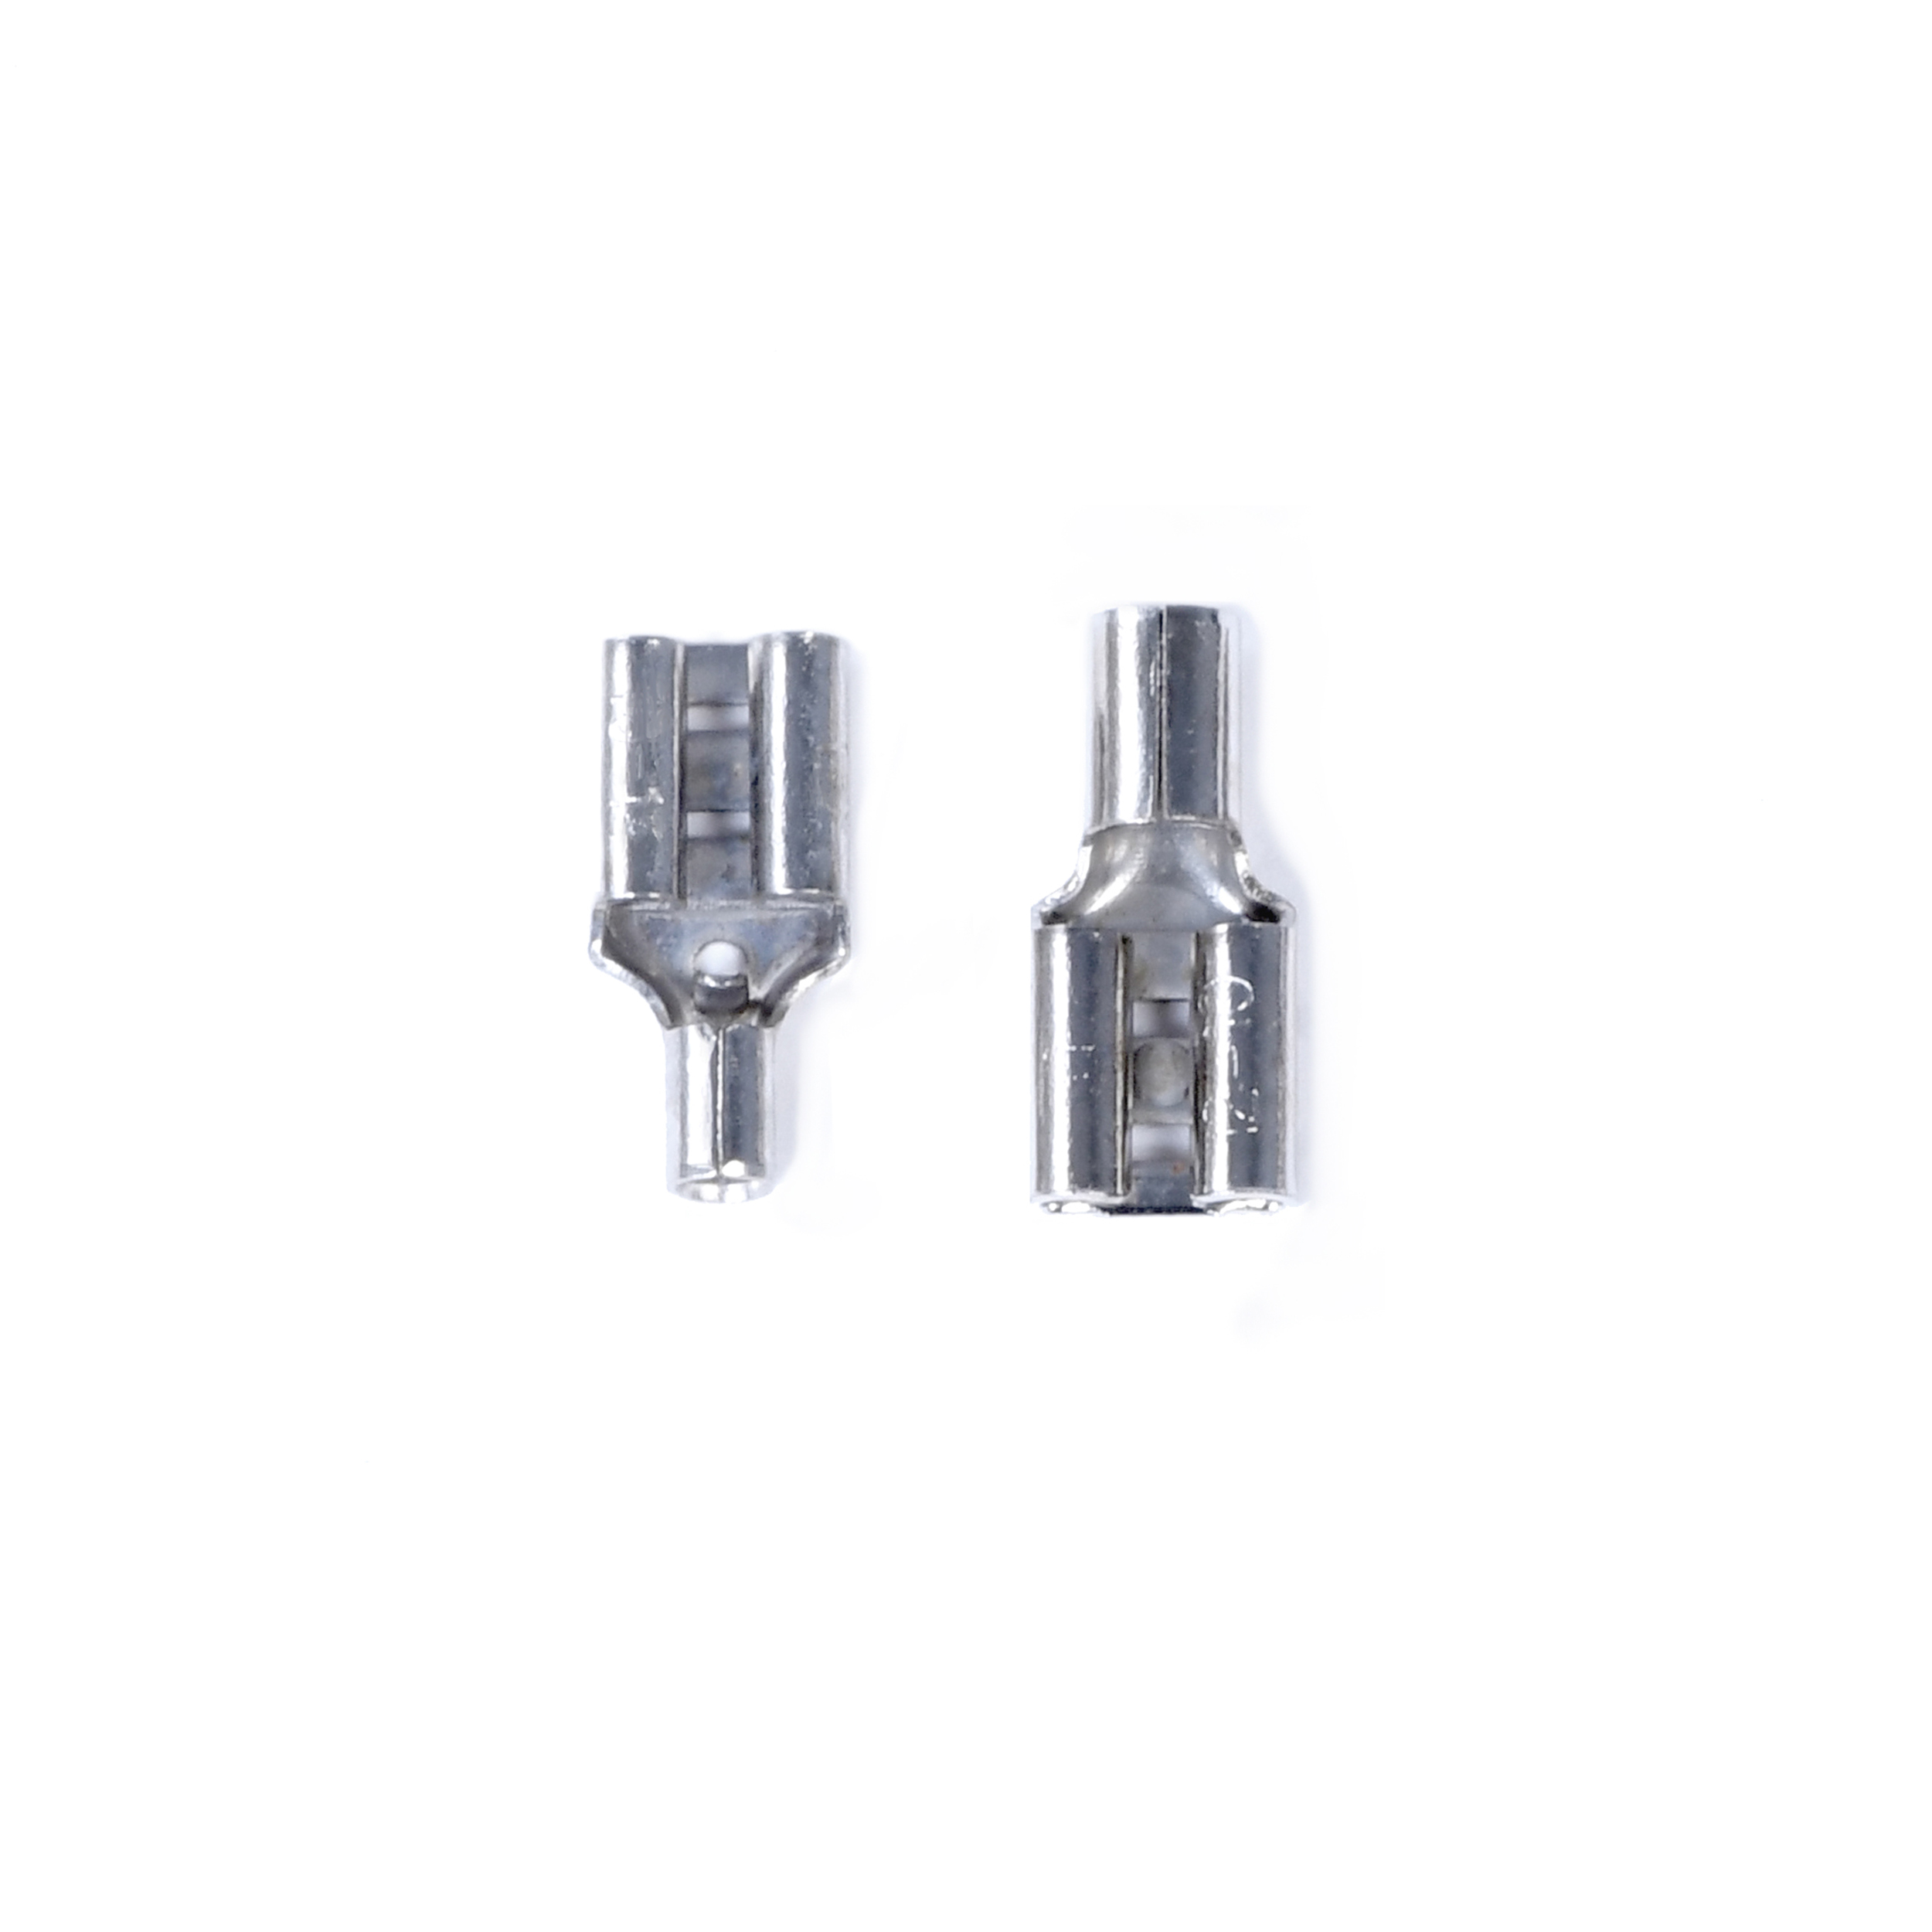 0.250" Female High-Temp Quick-Disconnects pack of 50 12-10 Ga 